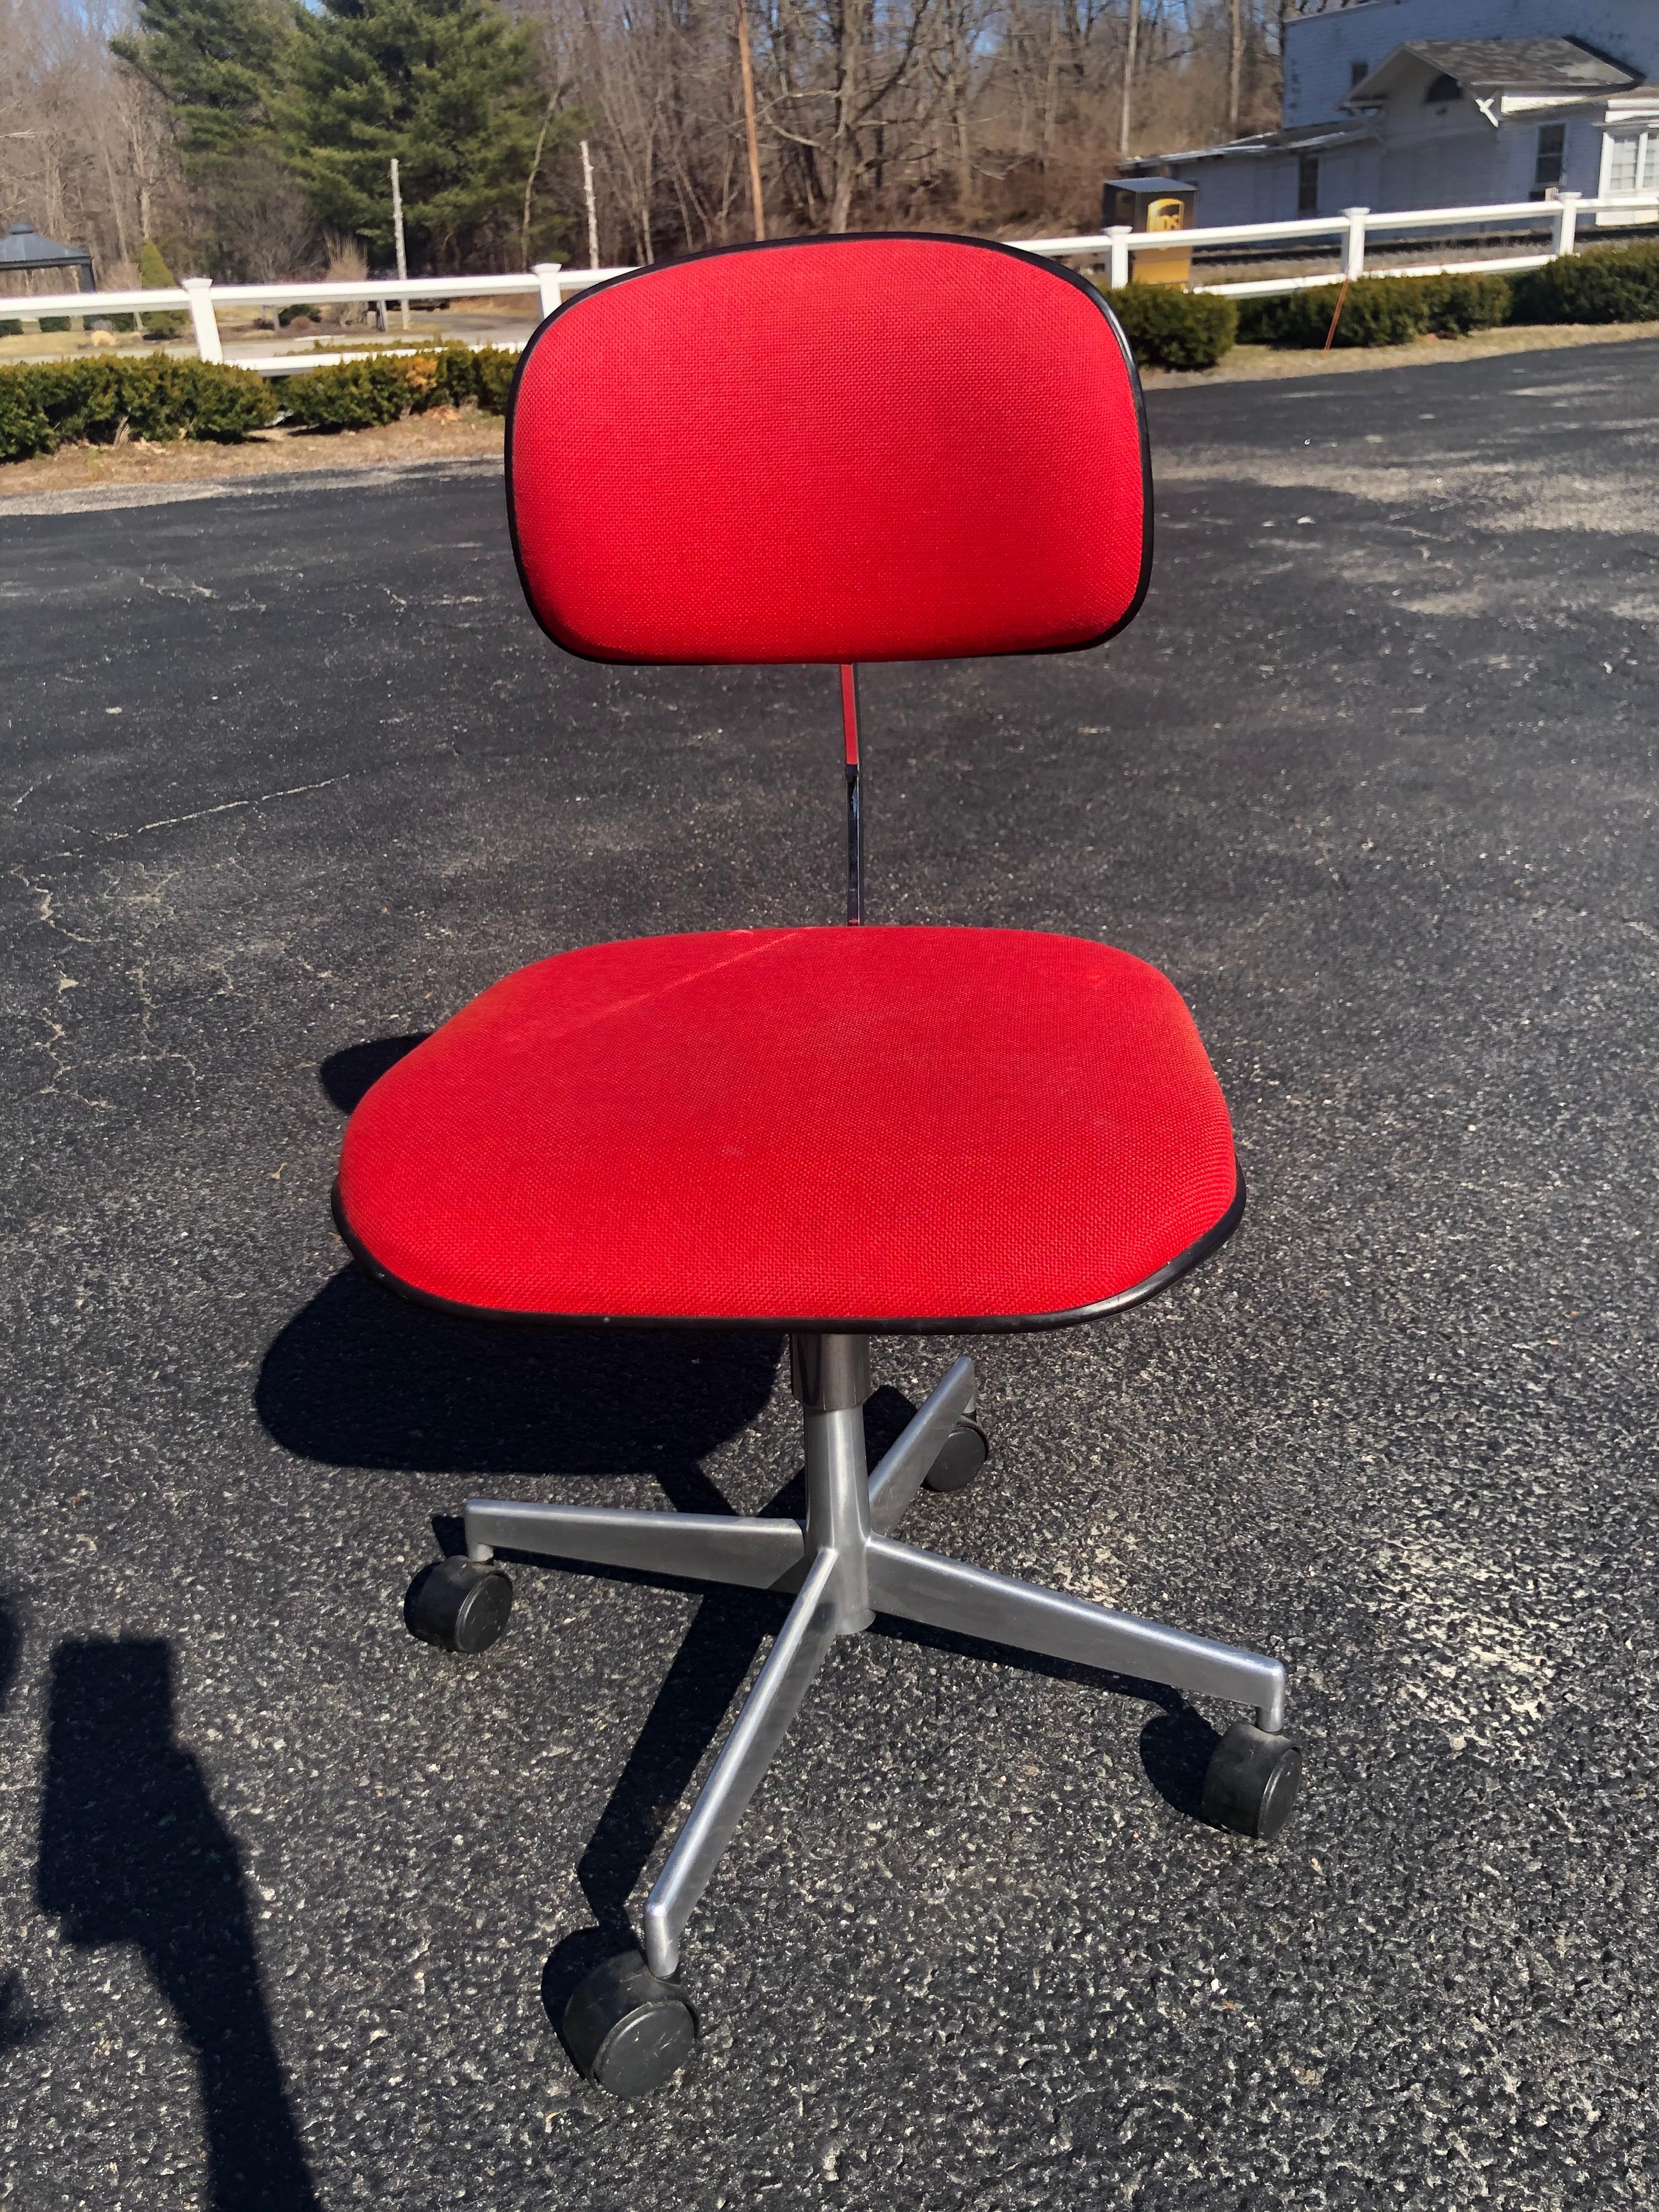 Mid Century red task chair by LaBofa. Classic Danish design. Timeless classic red wool upholstery with chrome X base and black castors. Adjustable height and adjustable tilt to upper back. Signed on rear.
Please ignore the white glove quote as this